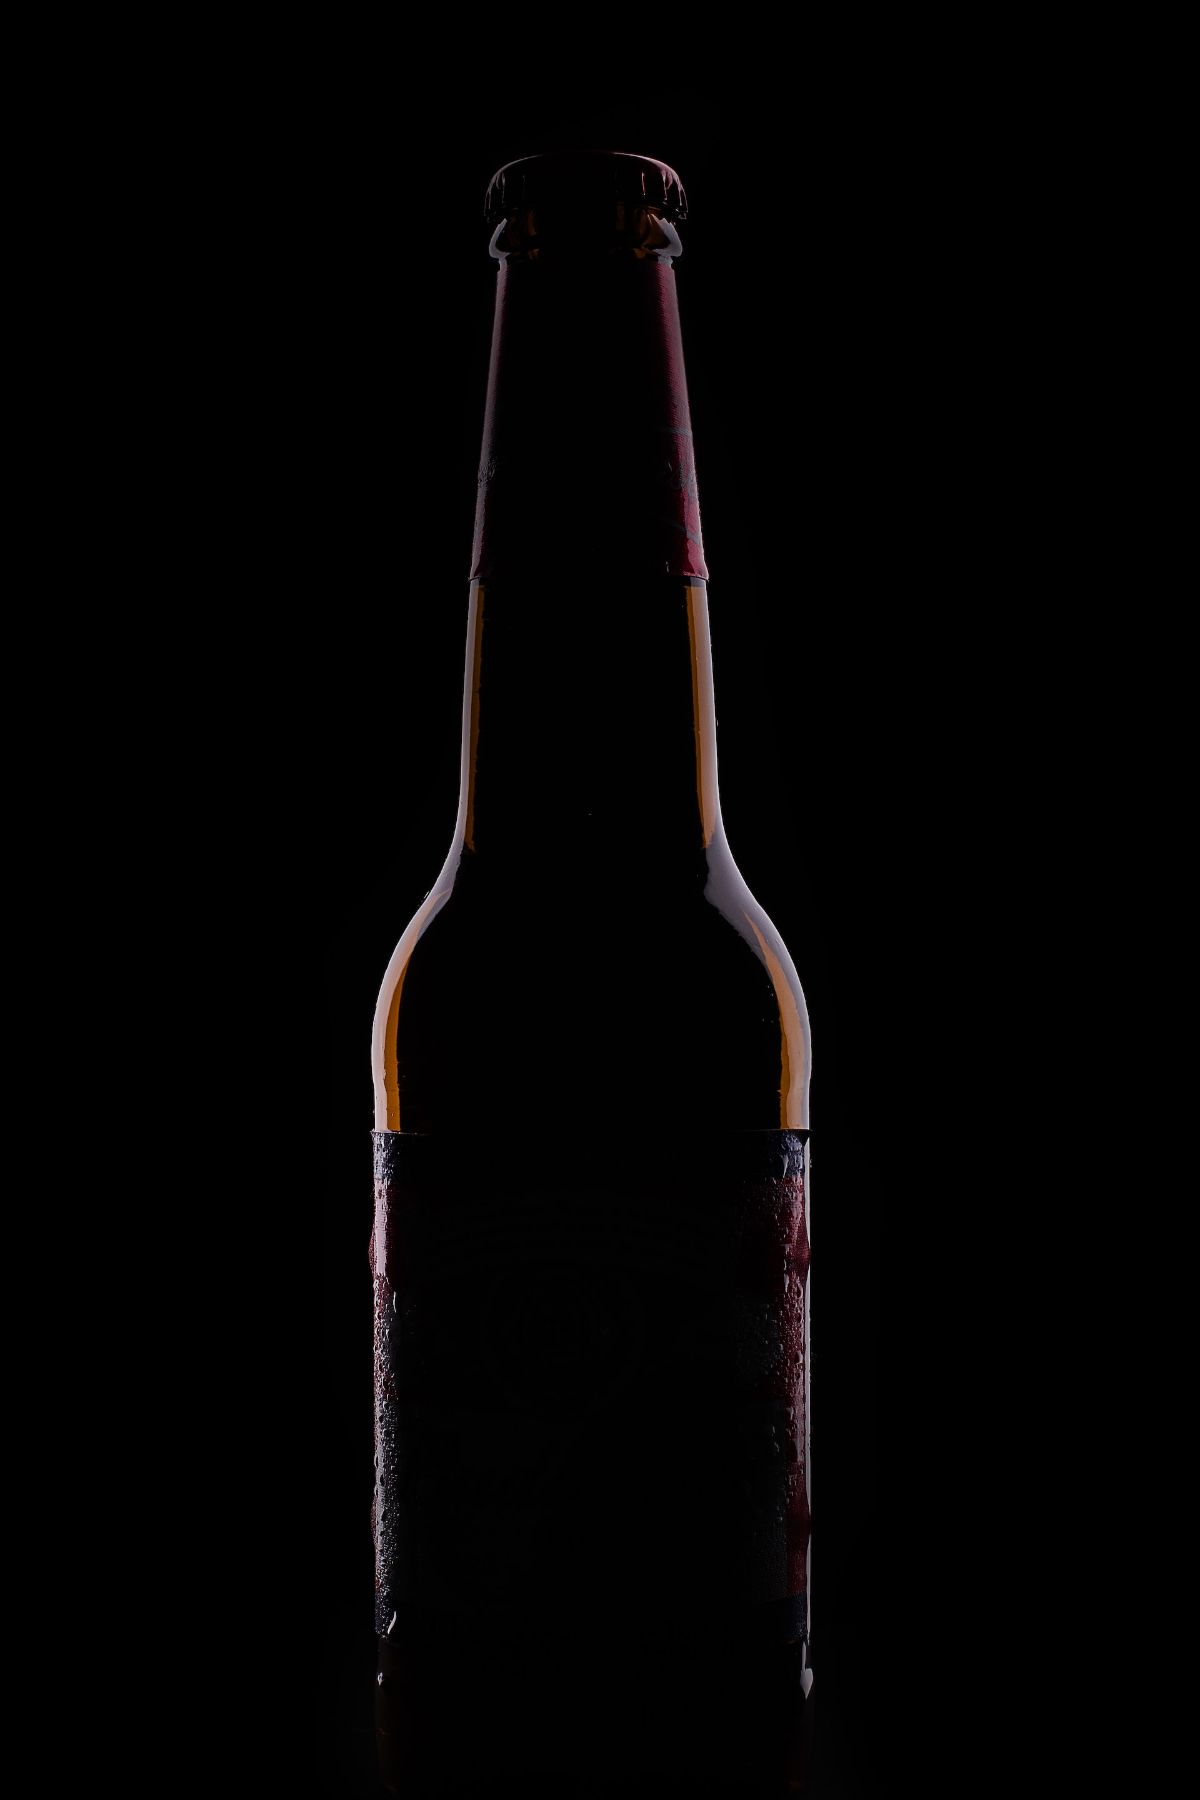 A dimly lit brown beer bottle without no label against a black background.